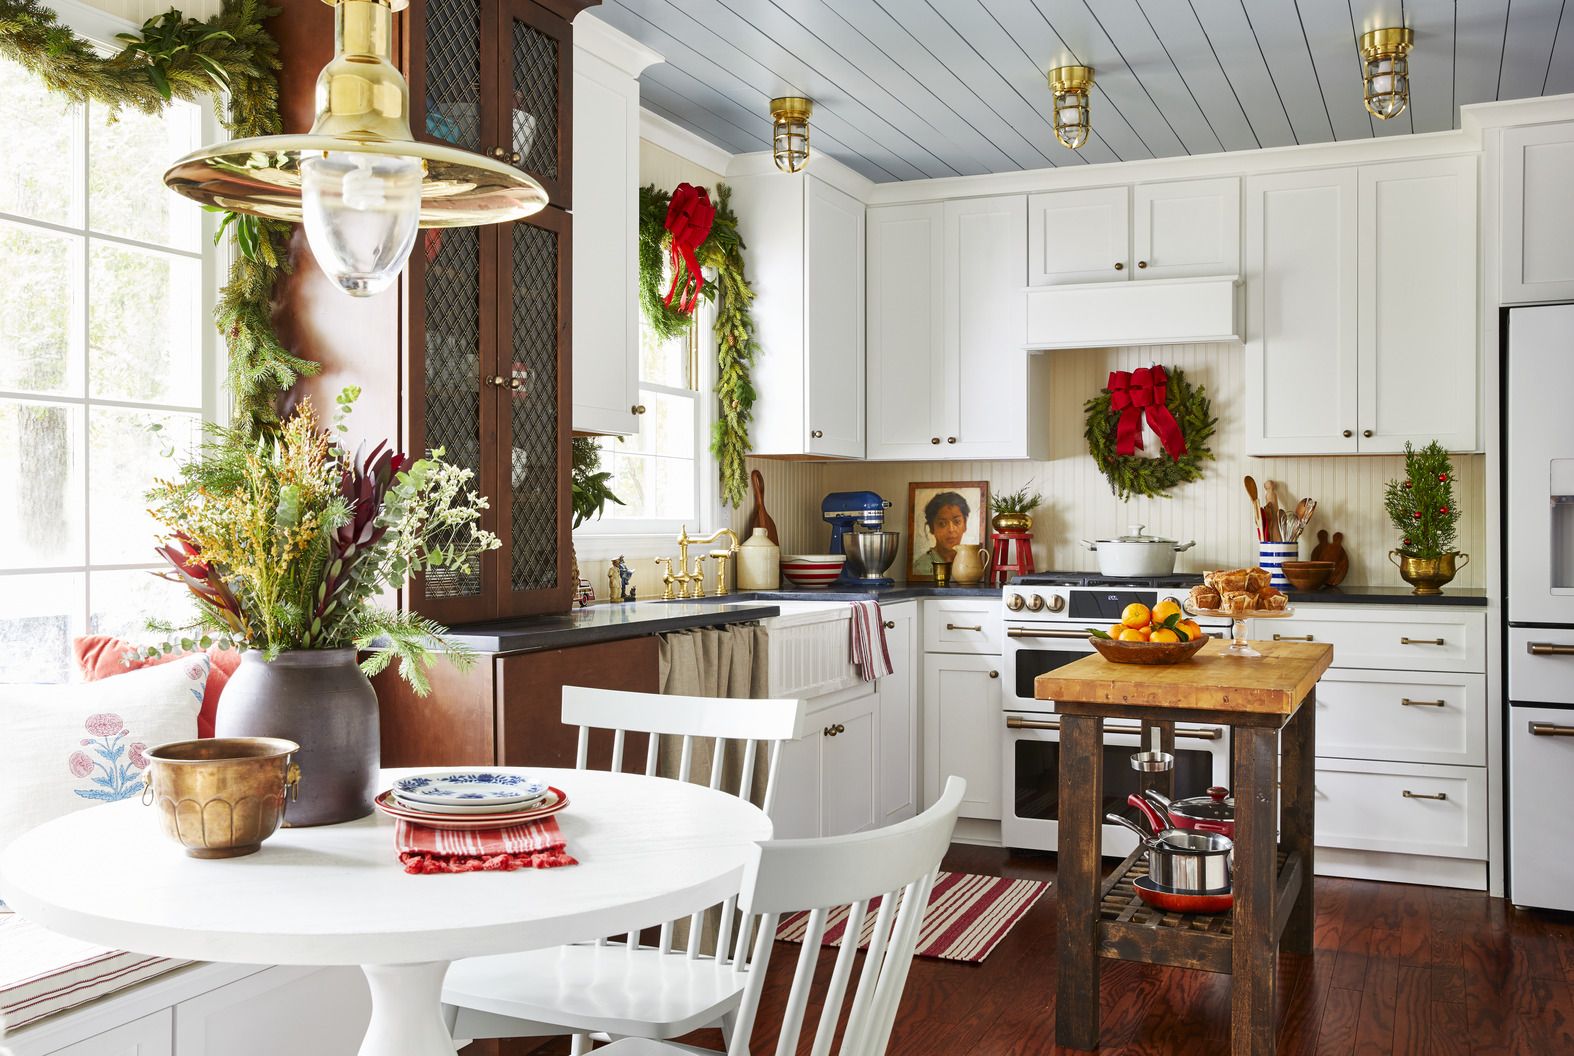 20 Kitchen Christmas Decorating Ideas   How to Decorate Your ...